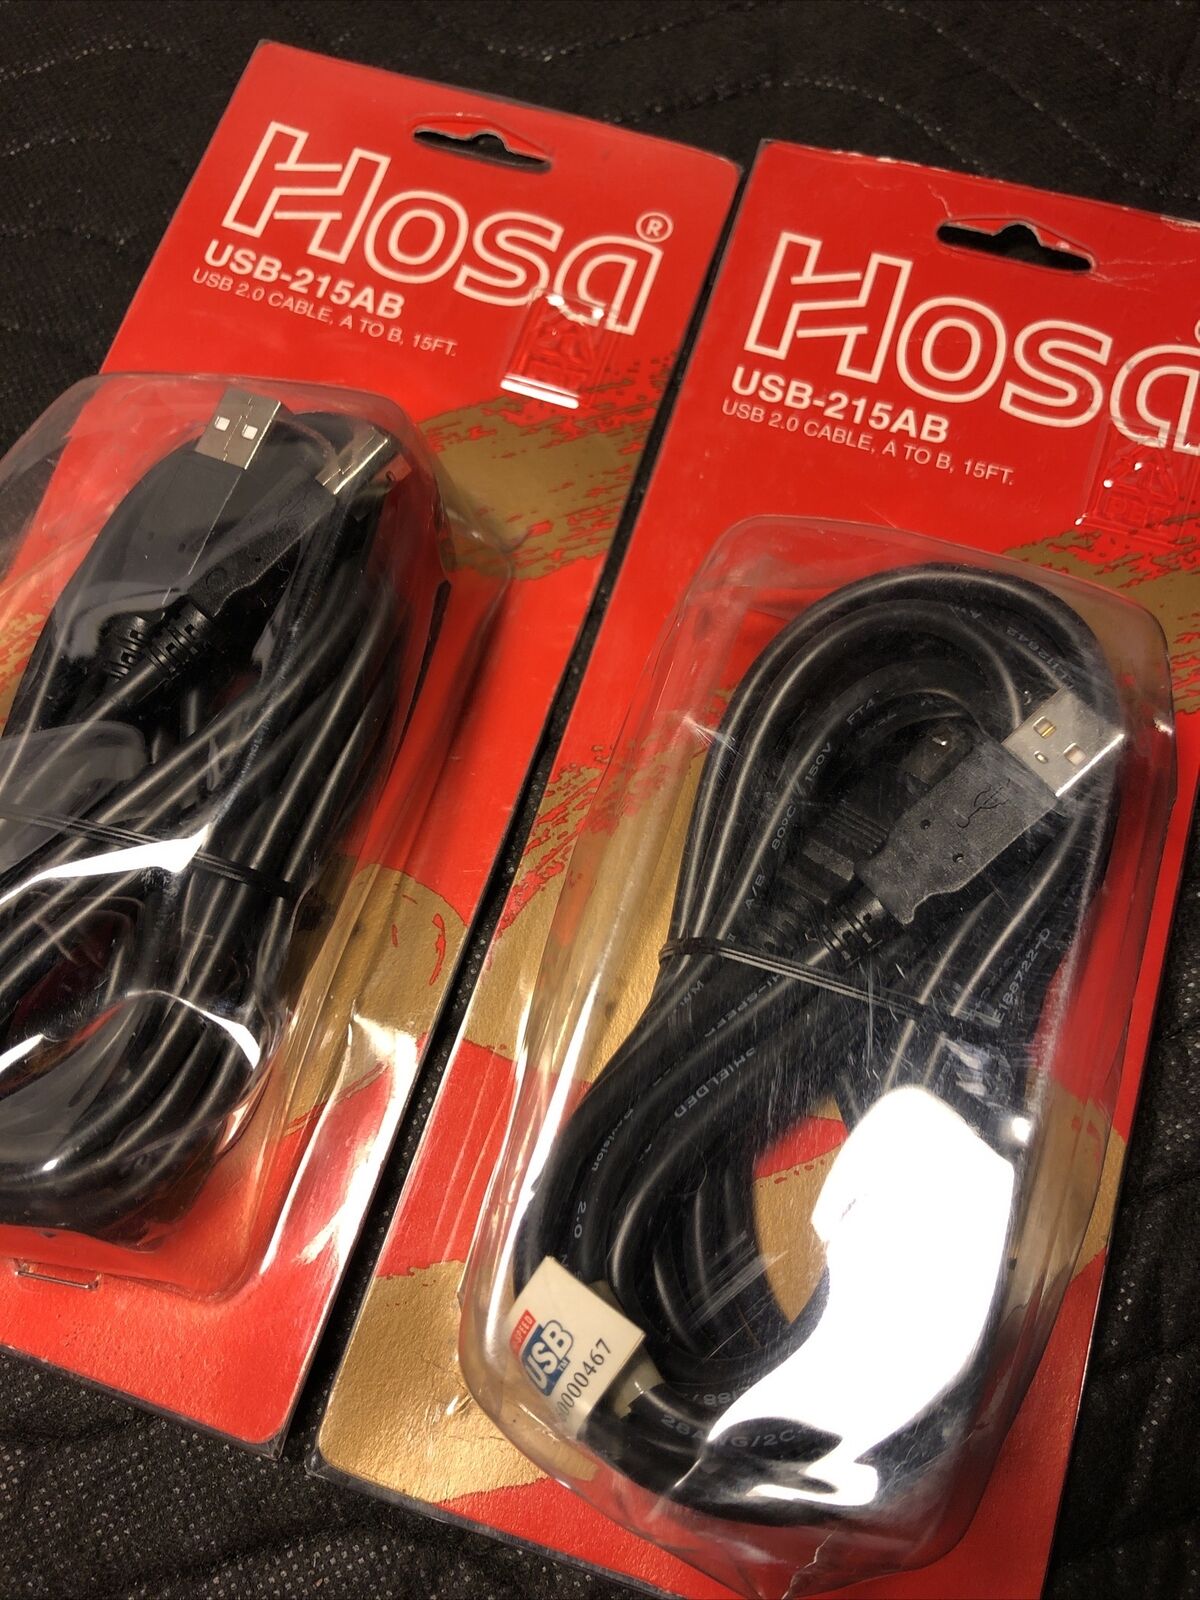 (2-pack) Hosa USB-215AB Type A to Type B High Speed USB Cable, 15 Feet New💥